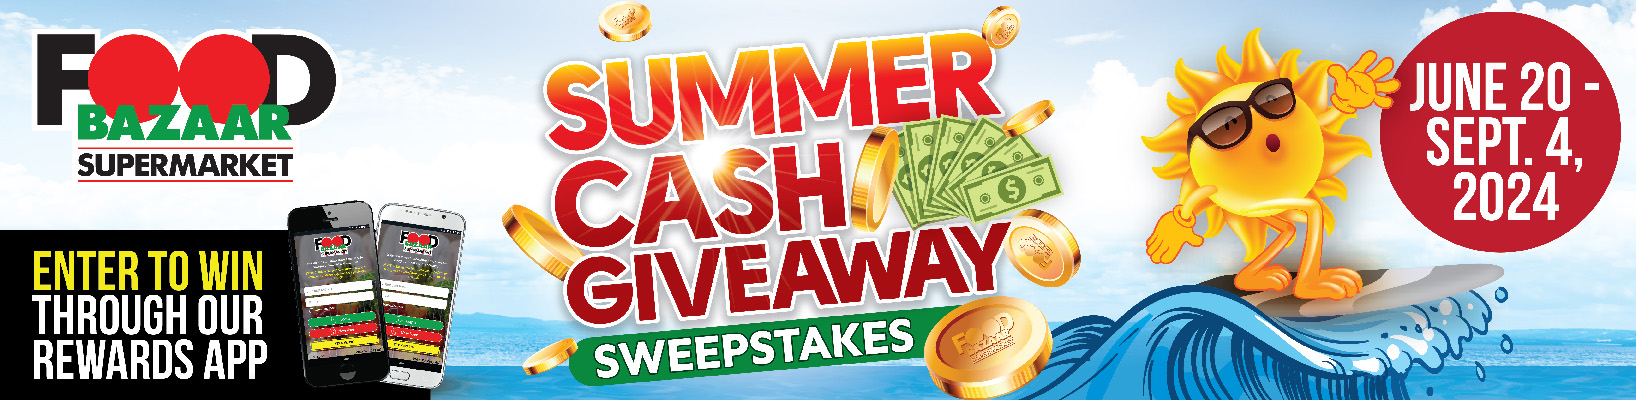 Summer Cash Giveaway Sweepstakes - Enter to Win Through our Rewards App